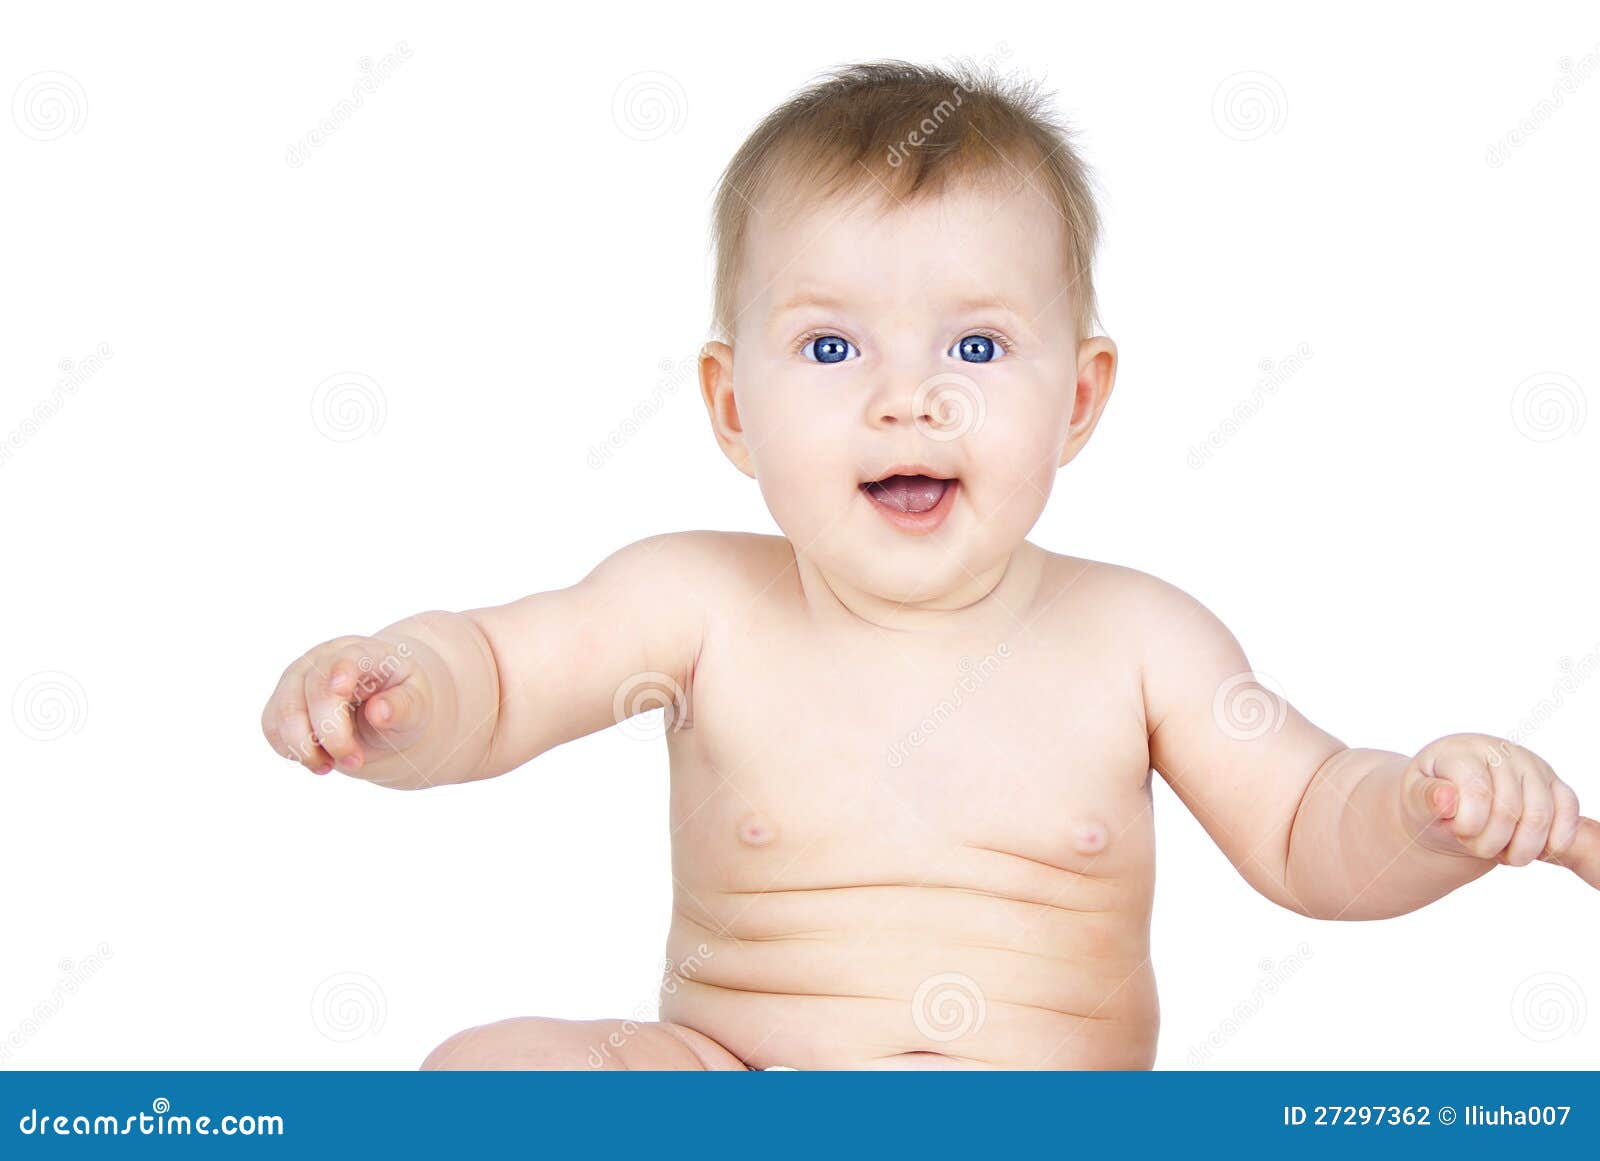 Baby Stomach Stock Photos, Images, & Pictures | Shutterstock